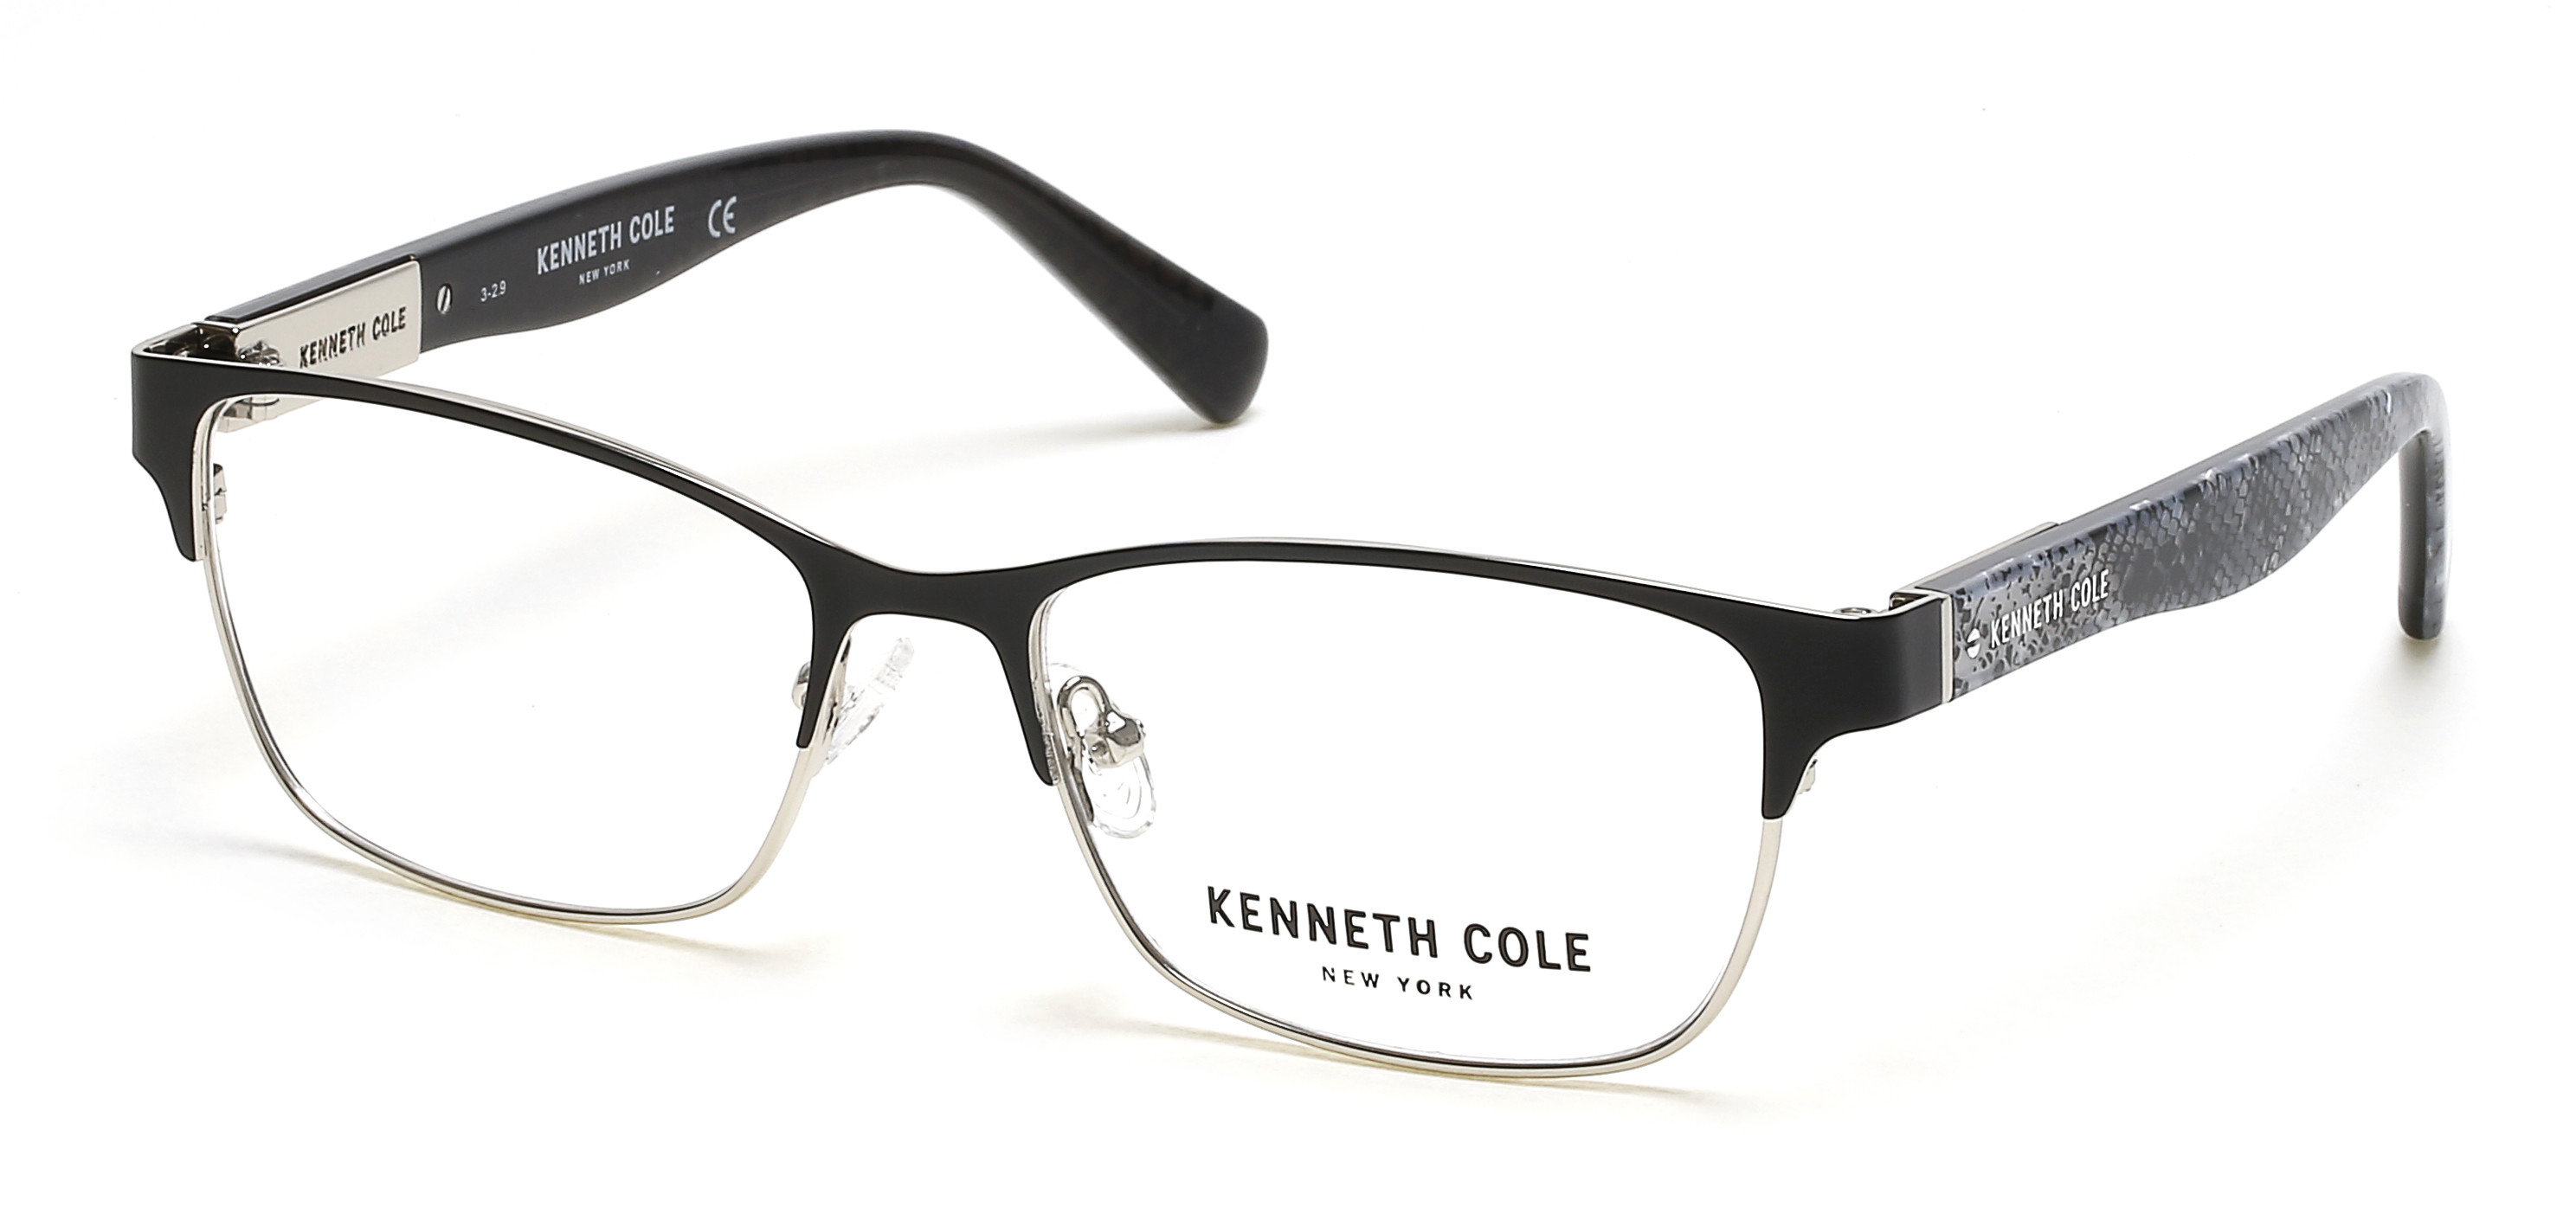 KENNETH COLE NY 0317